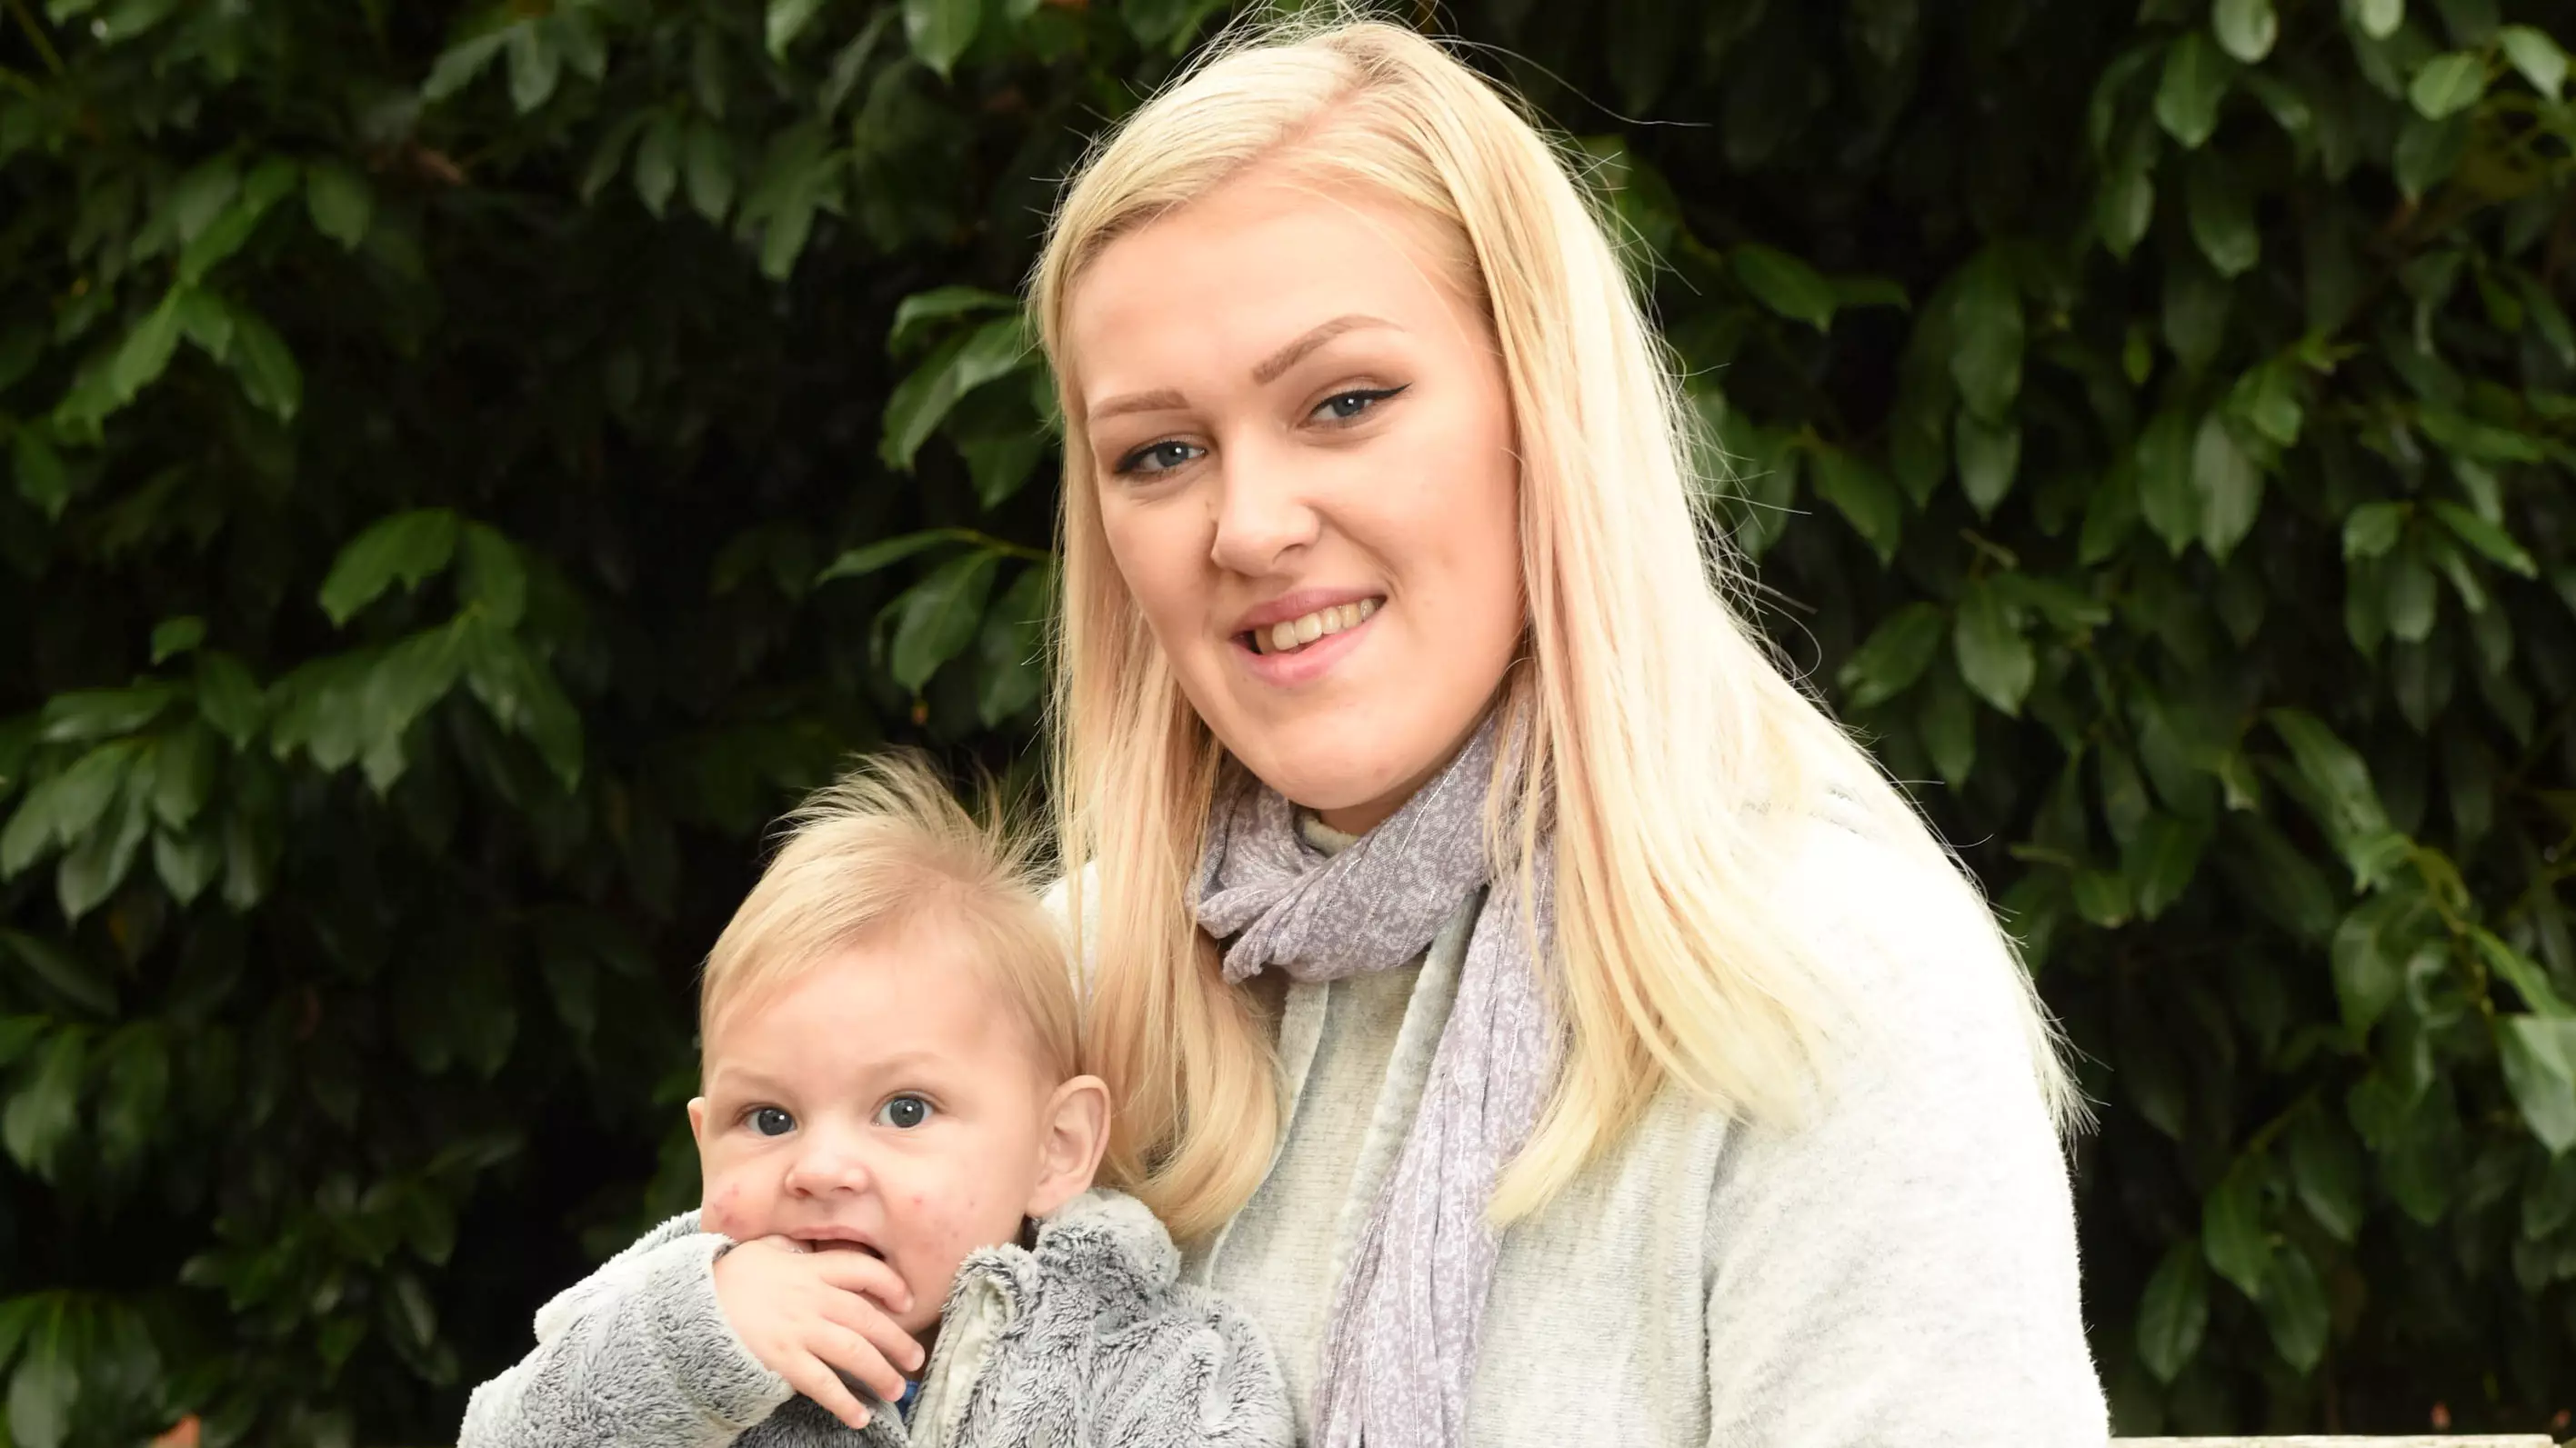 Woman Gives Birth To Surprise Baby After Thinking Labour Was Just Period Pains